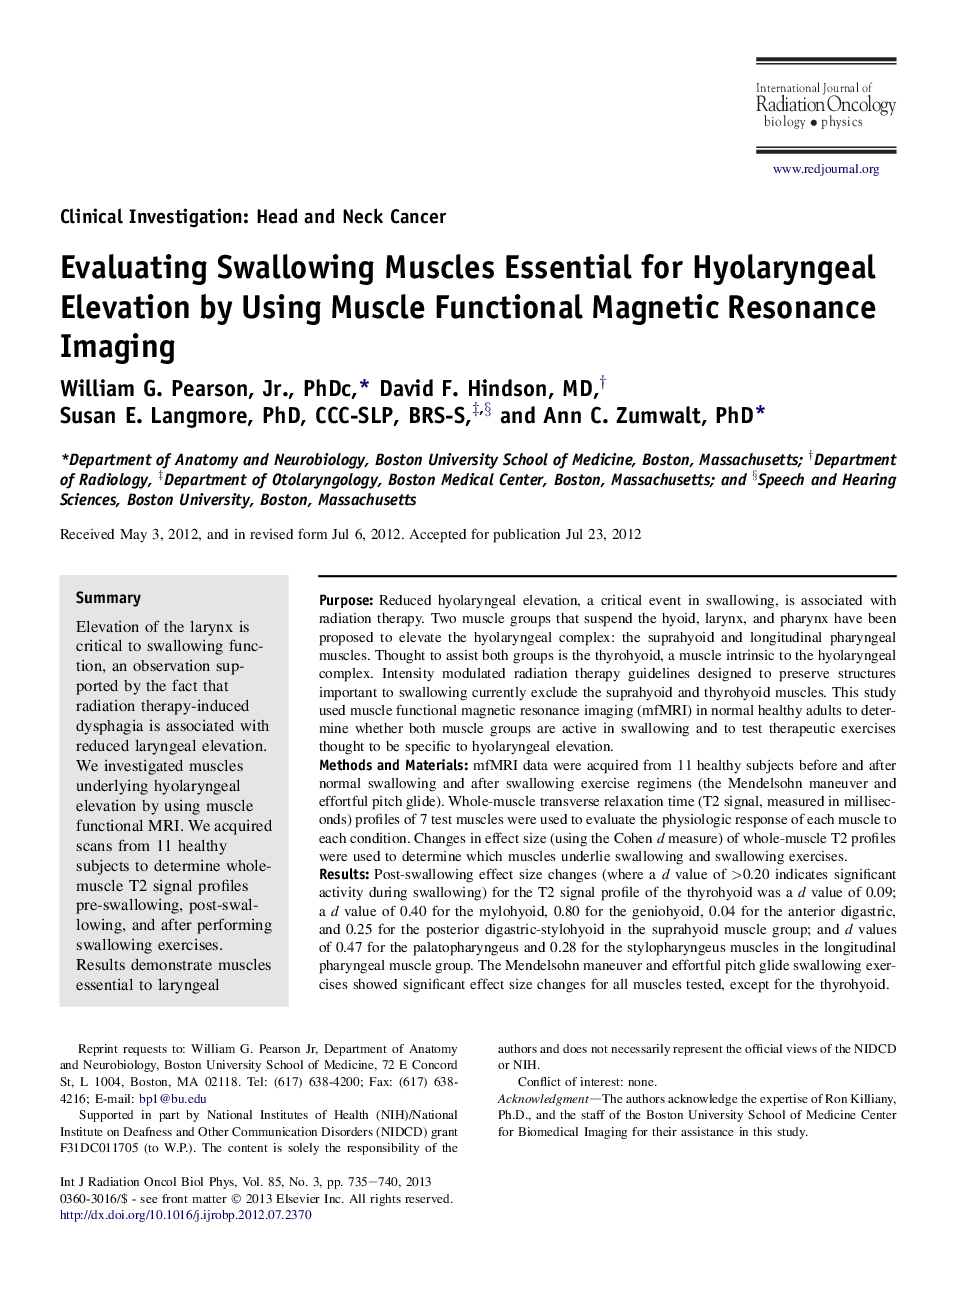 Evaluating Swallowing Muscles Essential for Hyolaryngeal Elevation by Using Muscle Functional Magnetic Resonance Imaging